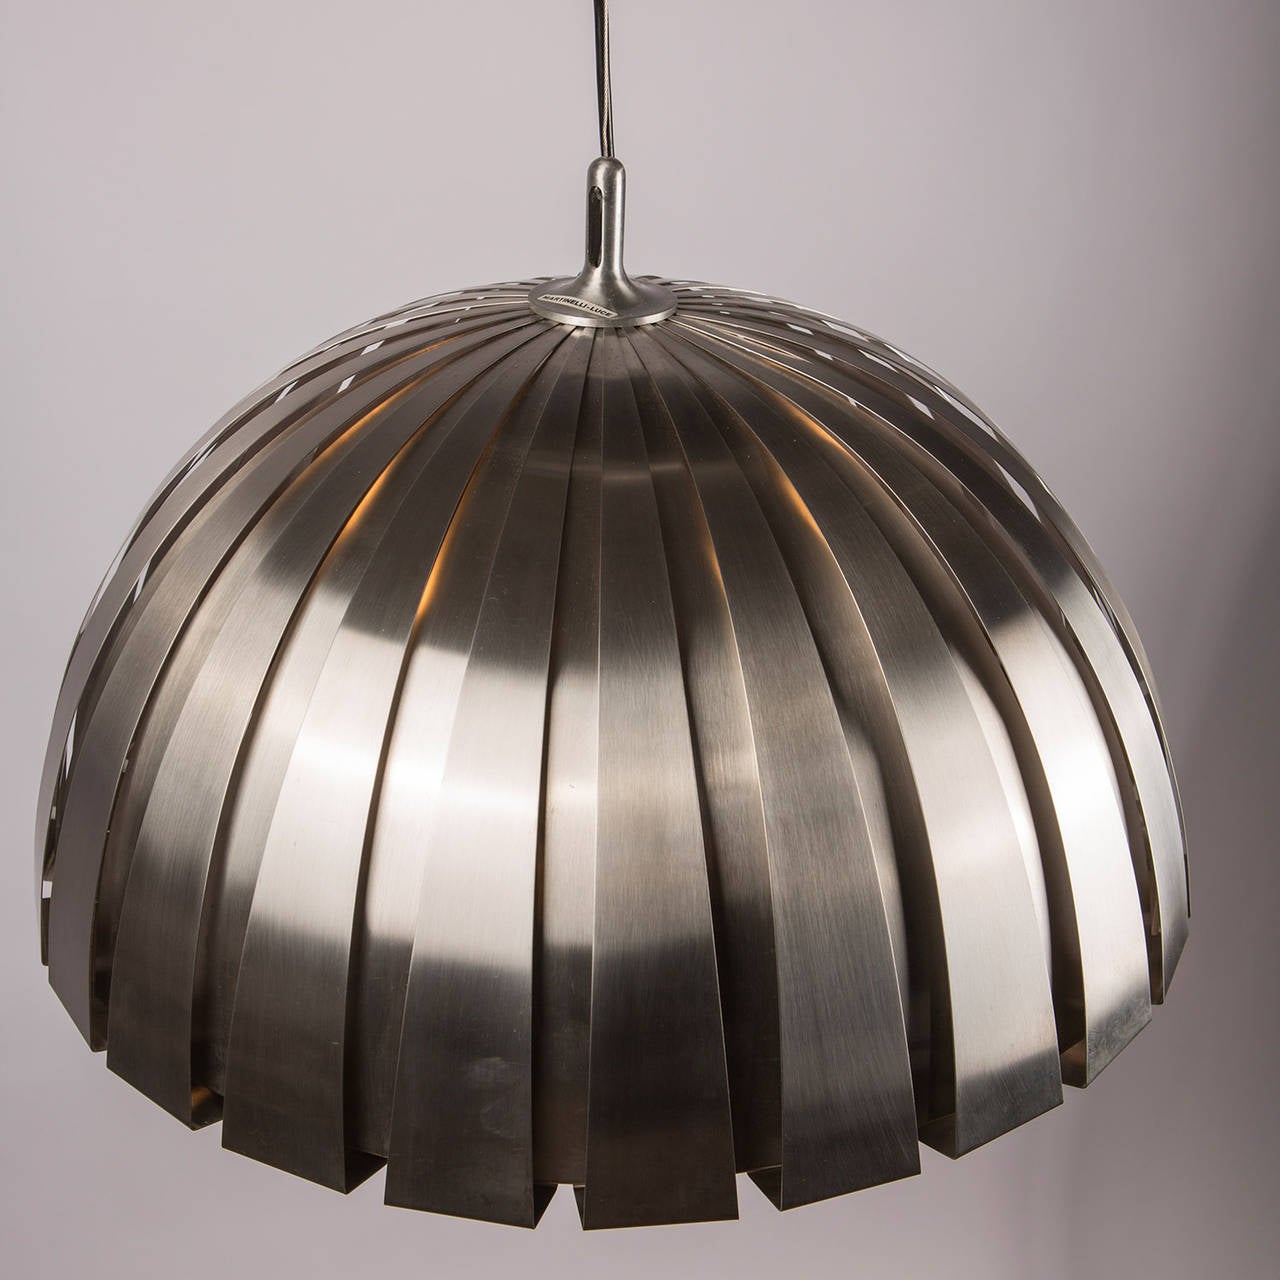 Set of Two Steel Ceiling Lamps by Elio Martinelli for Martinelli, Italy, 1960s In Good Condition For Sale In Milan, IT